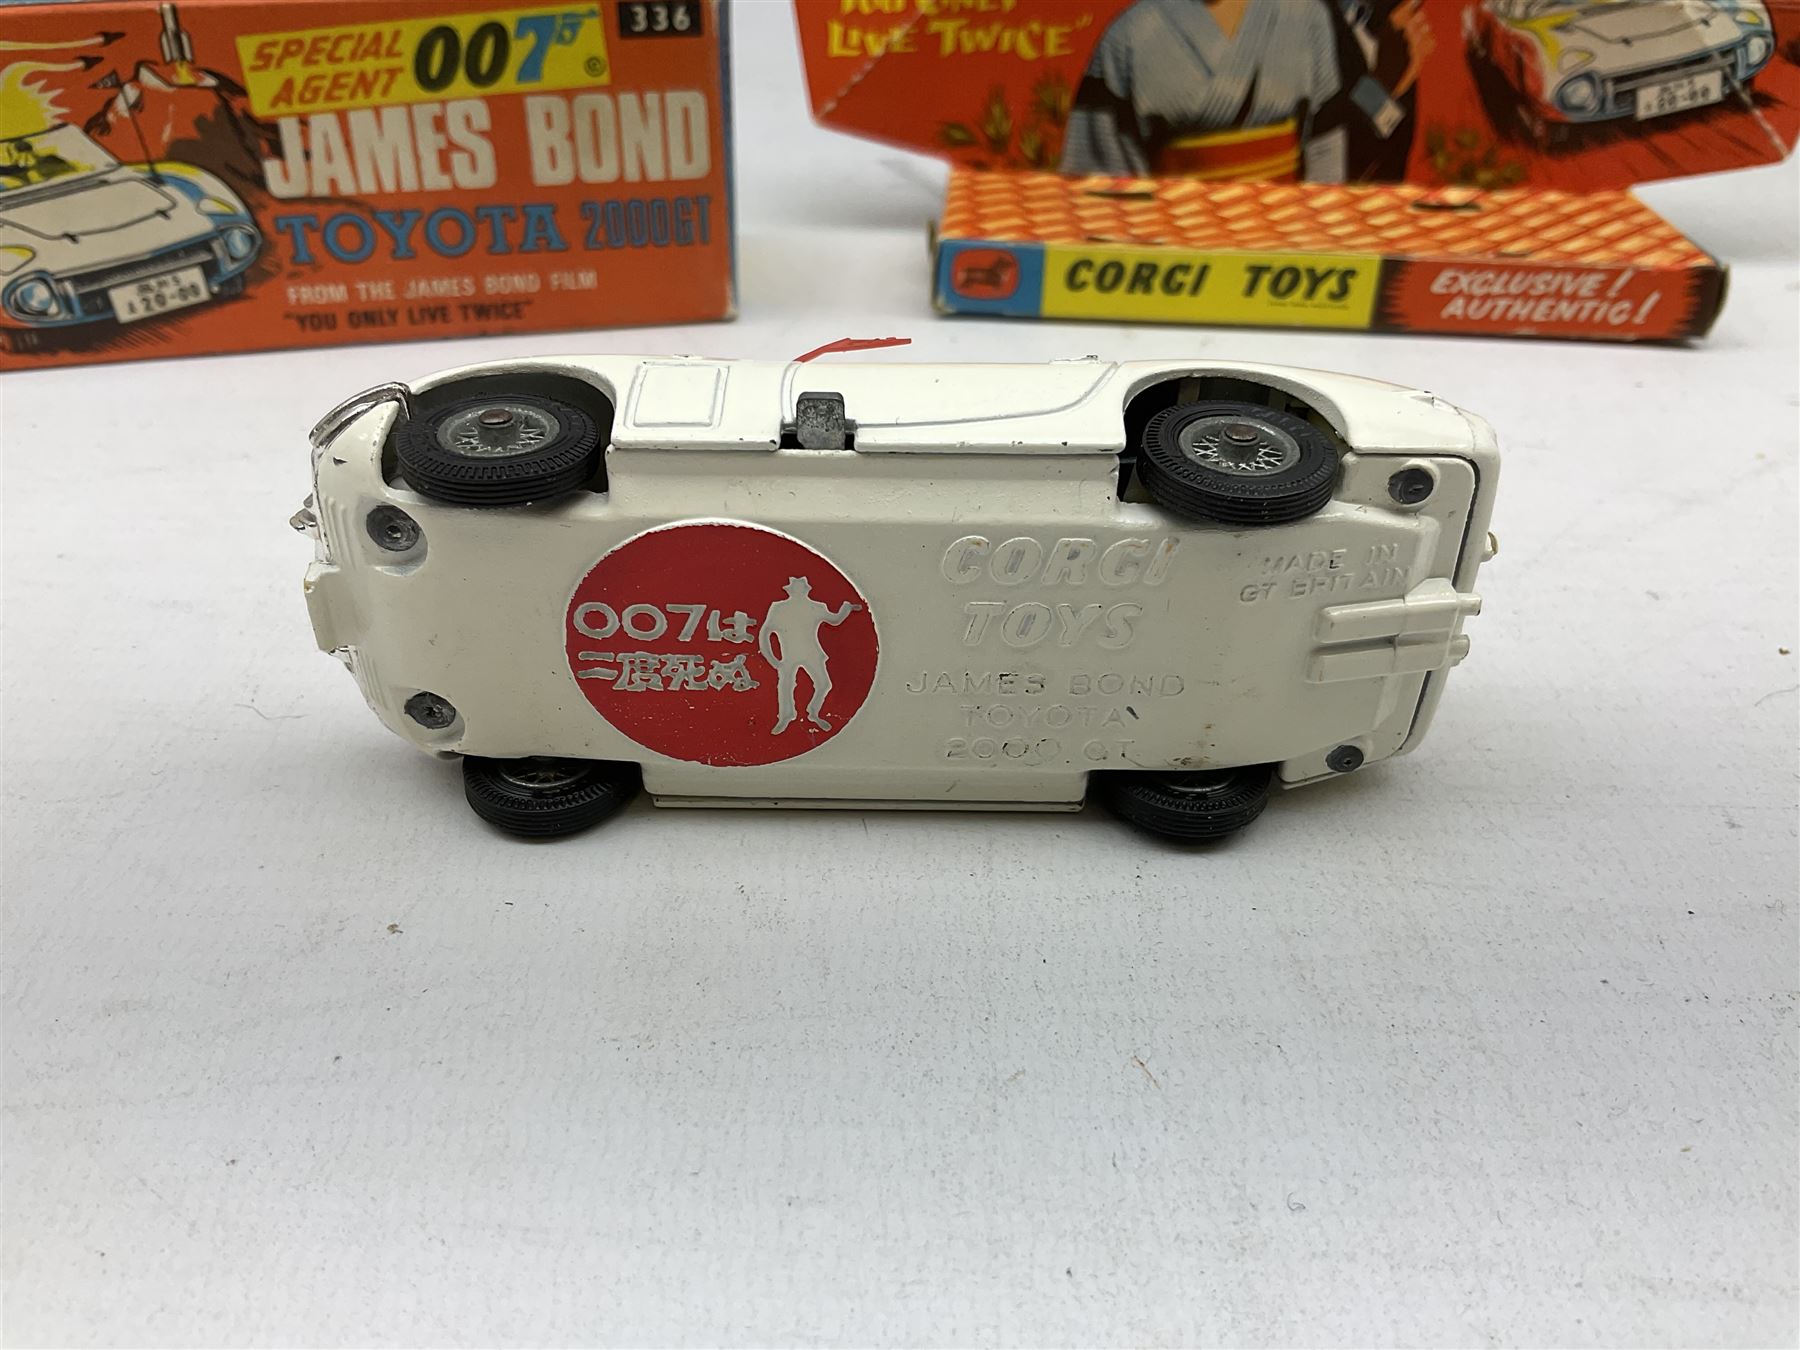 Corgi James Bond Toyota 2000GT from You Only Live Twice No.336 - Image 5 of 7